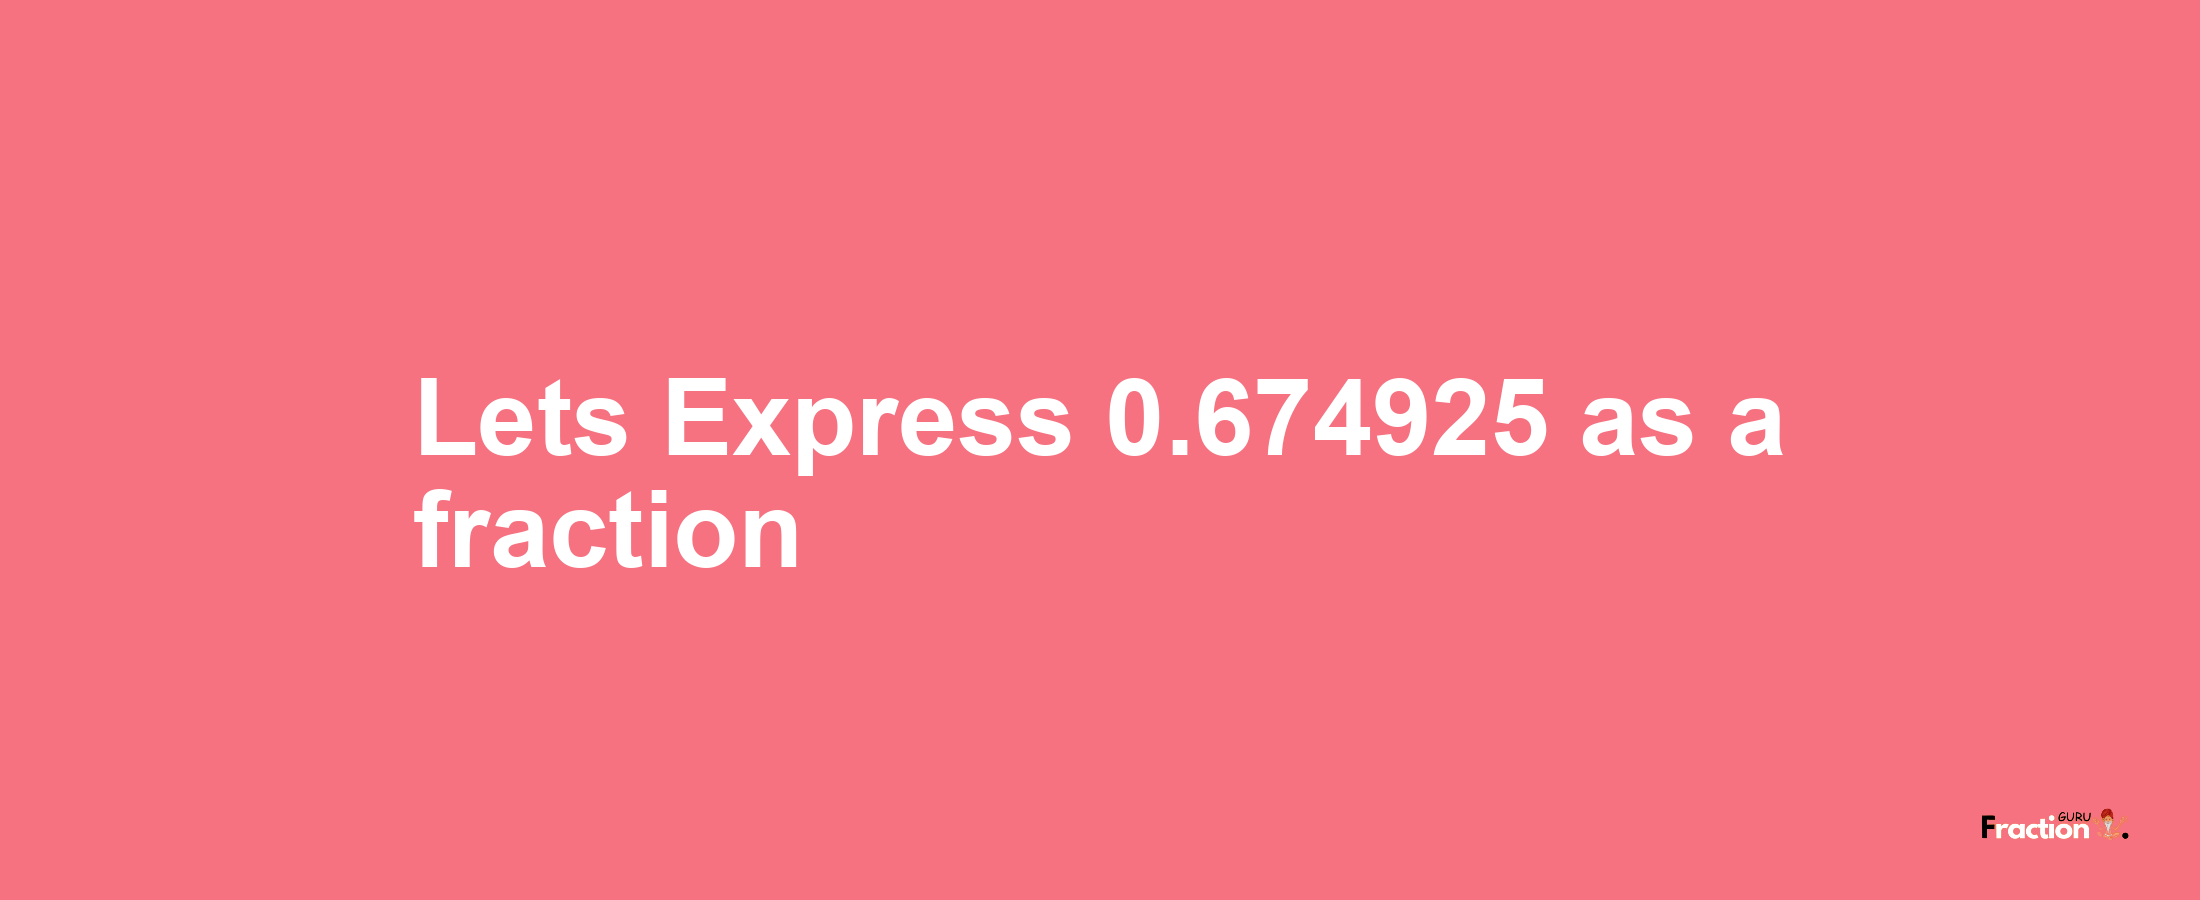 Lets Express 0.674925 as afraction